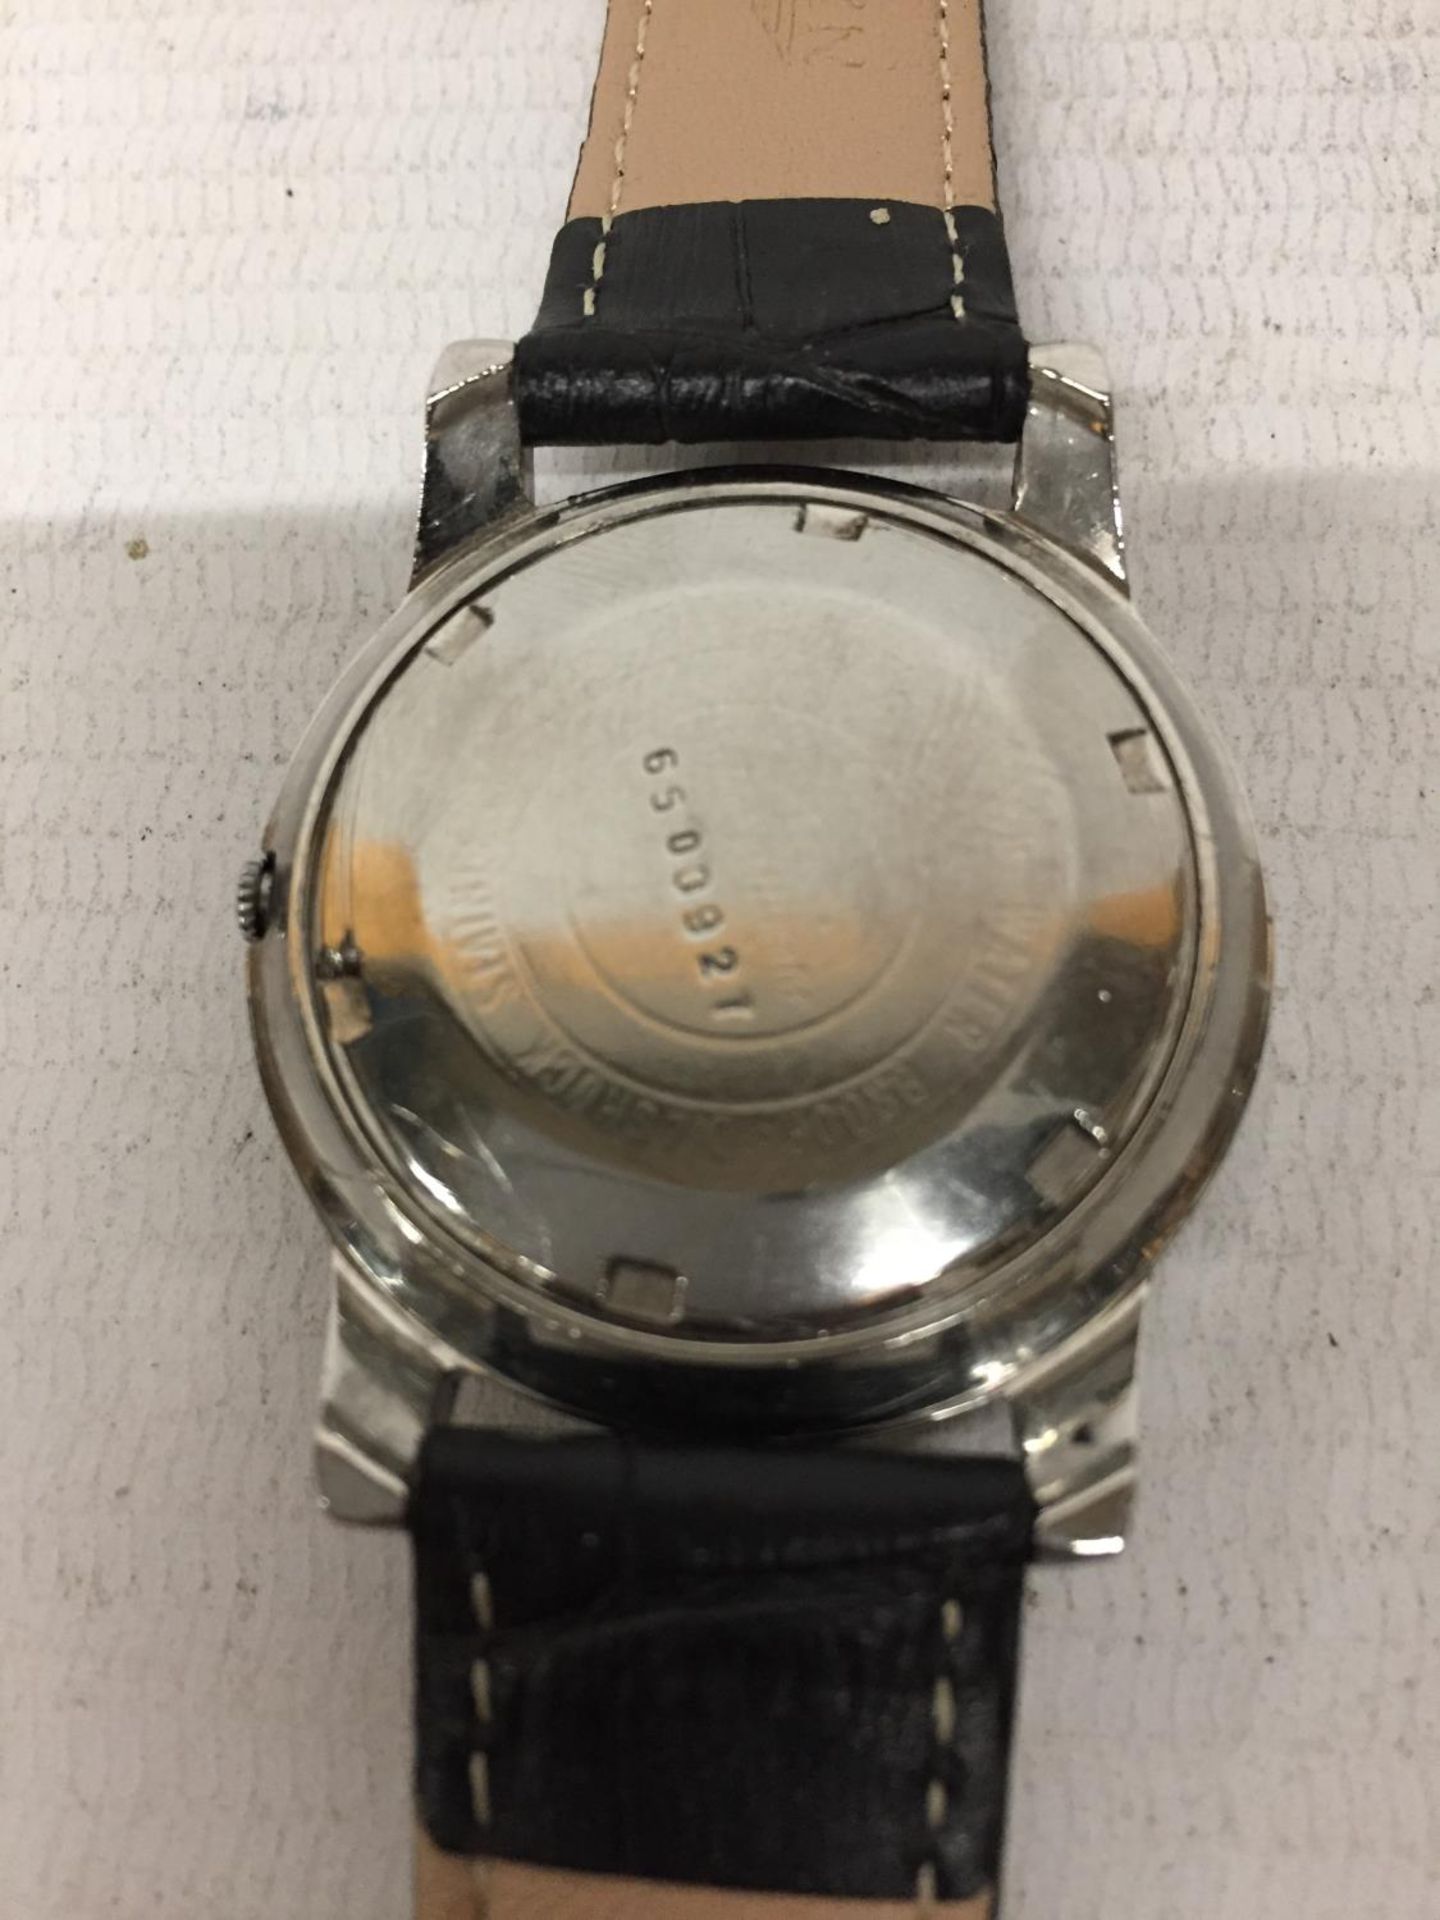 A VINTAGE SEIKO SPORTSMATIC AUTOMATIC WRISTWATCH 7625-8060 SEEN WORKING BUT NO WARRANTY - Image 3 of 3